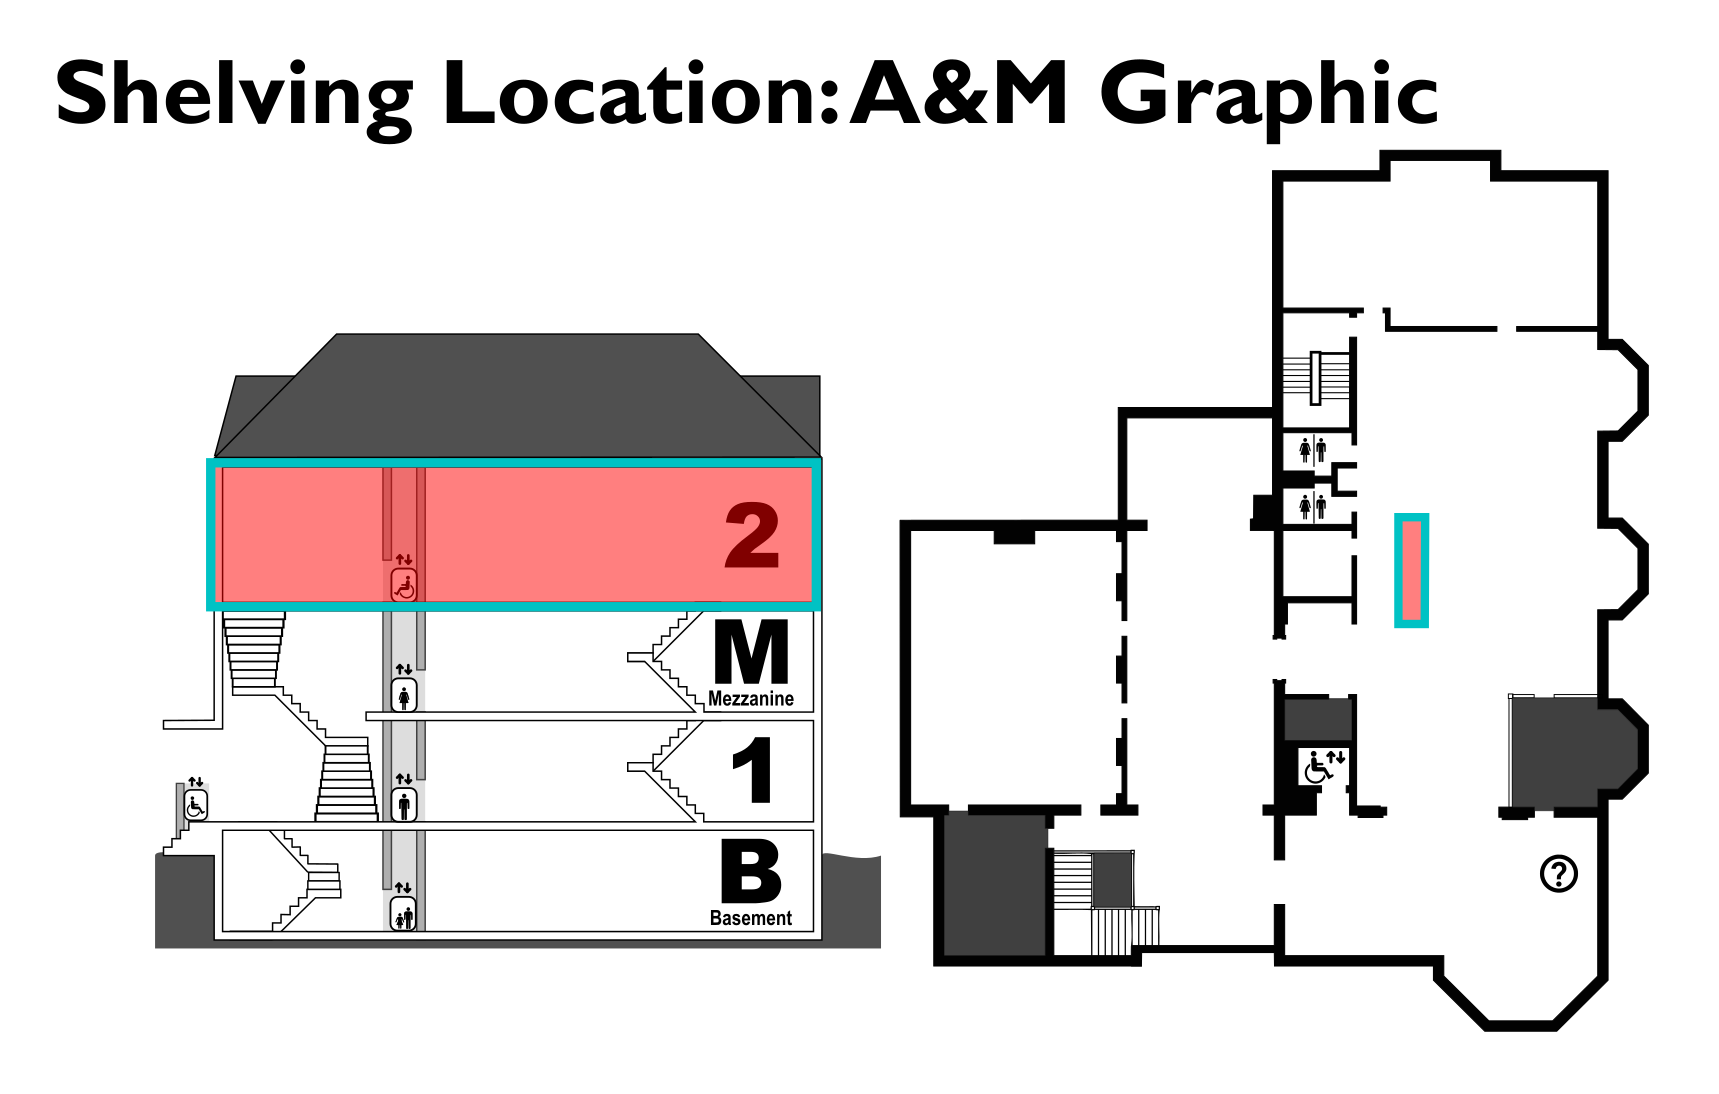 map showing location of A&M Graphic